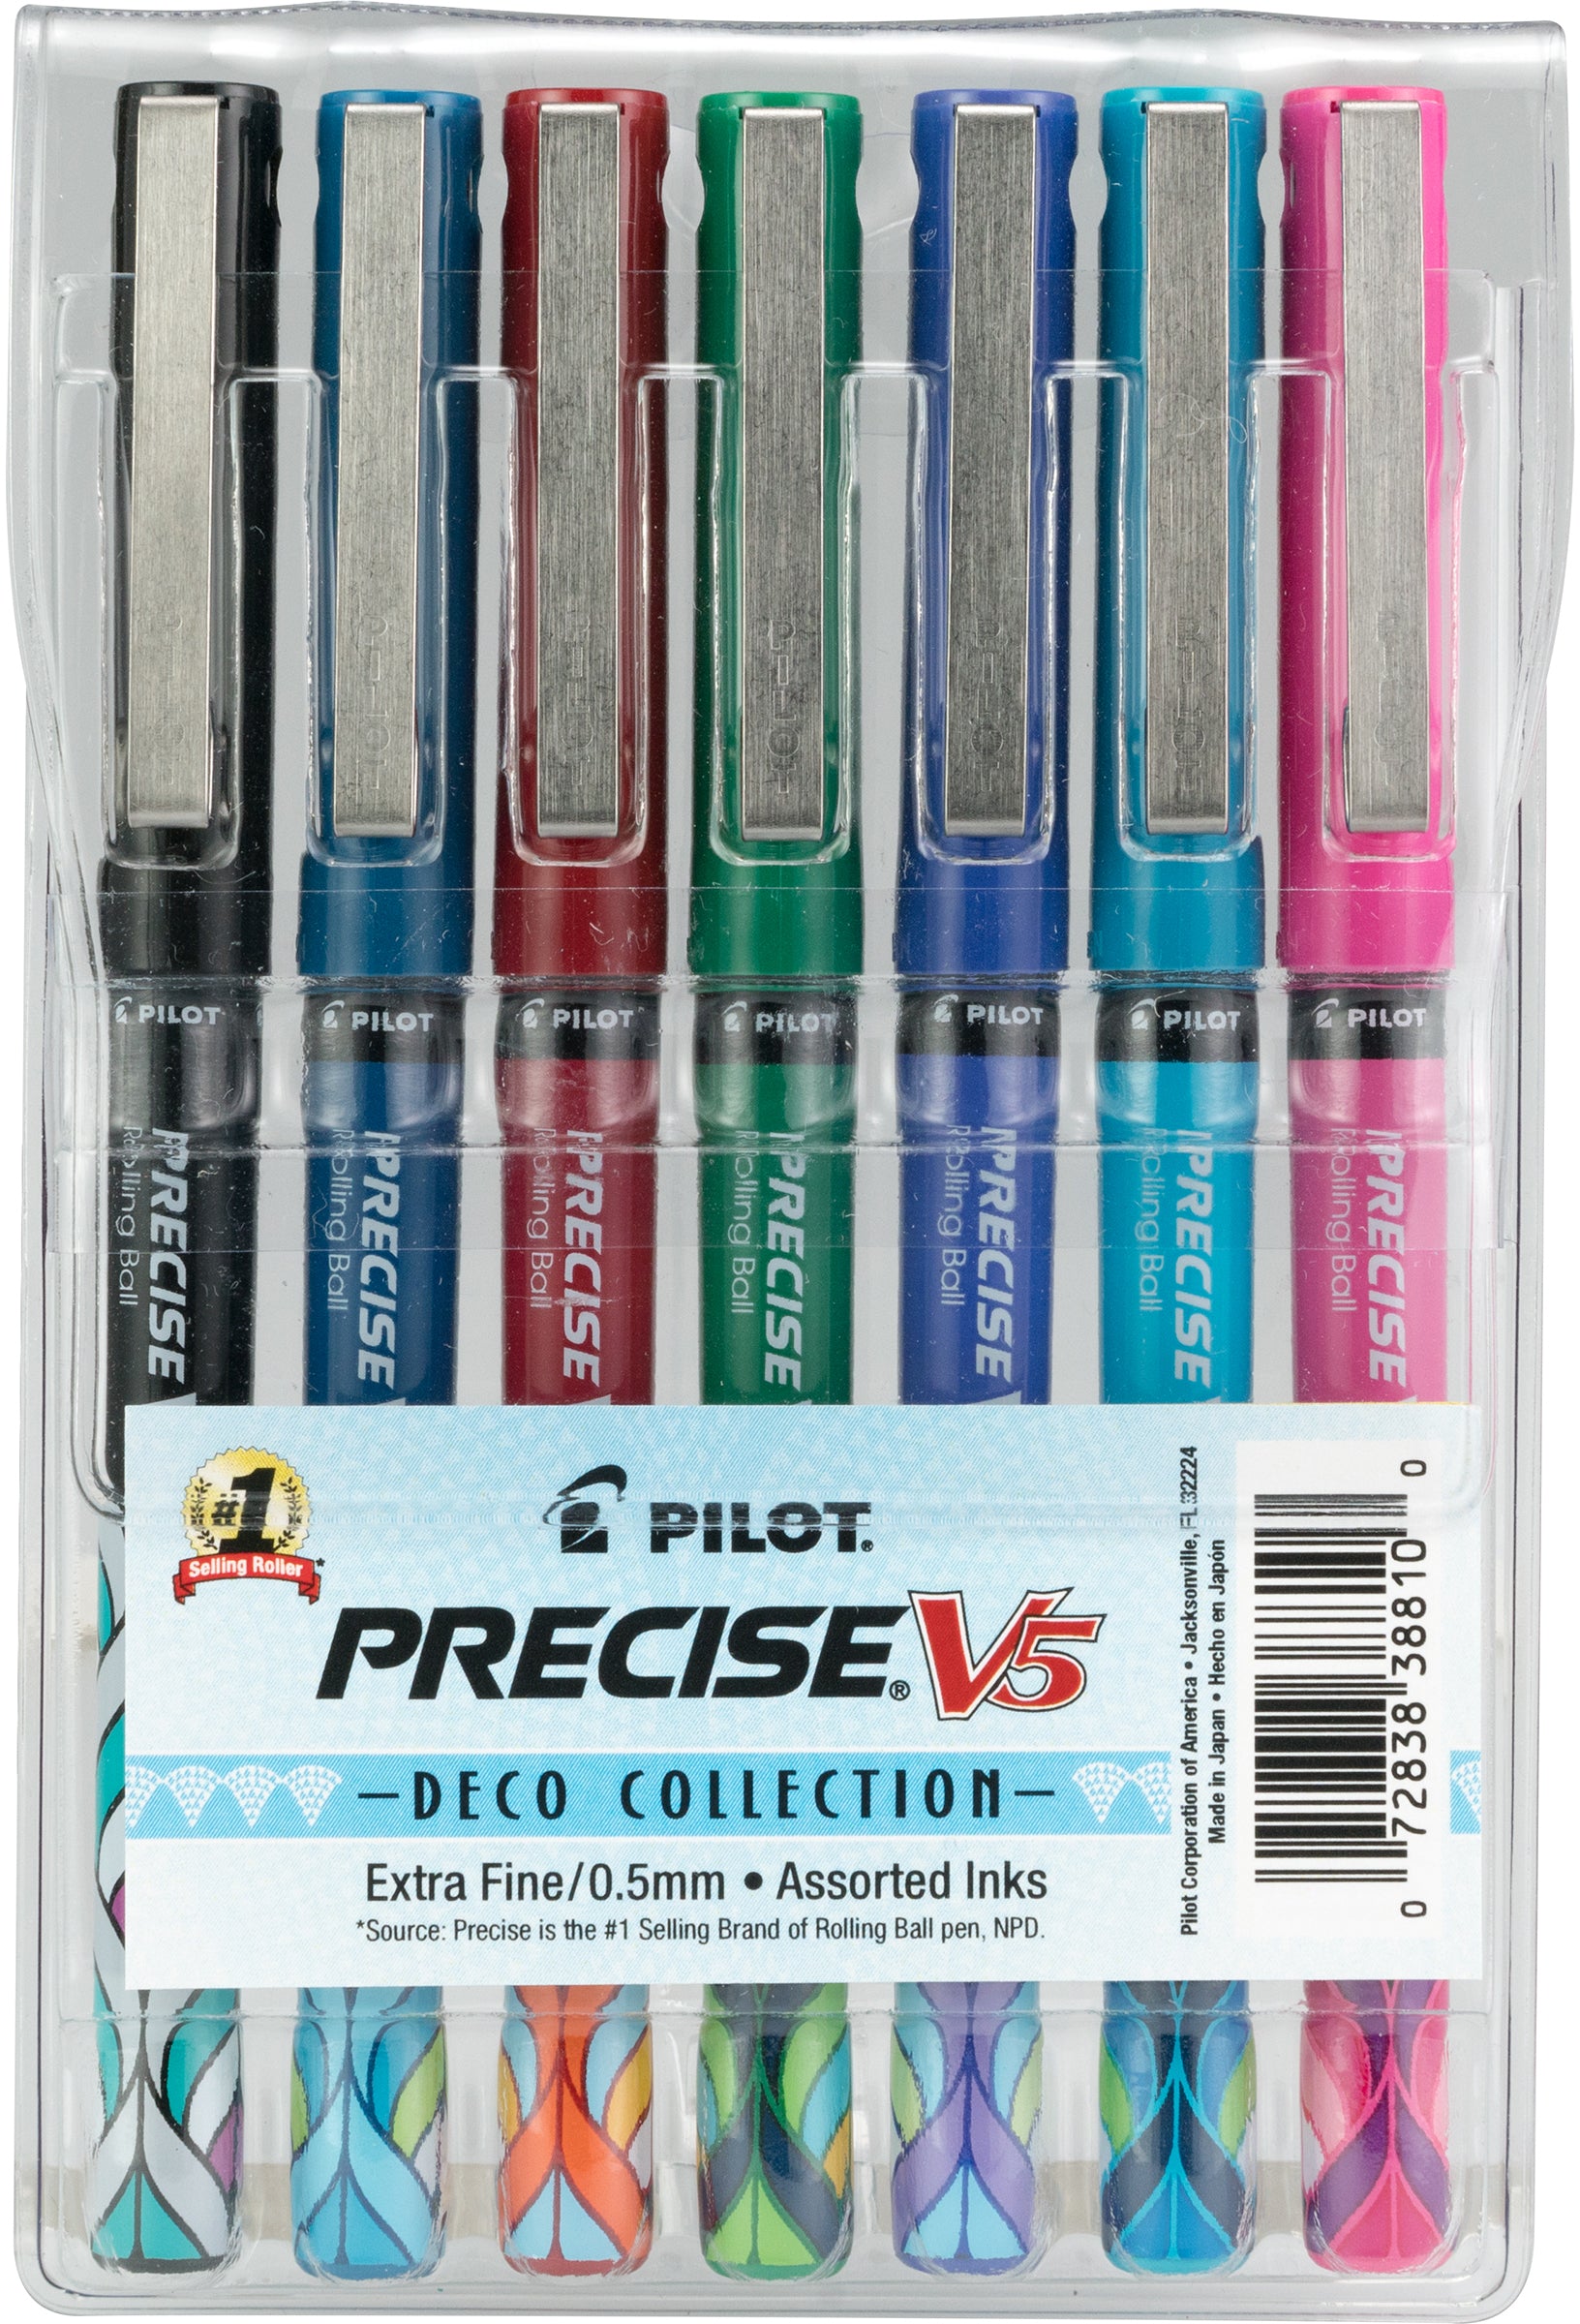 Pilot 38810 Precise V5 Deco Collection Rolling Ball Pens, 0.5mm Extra Fine Point, 7-Pack Pouch Assorted Colors